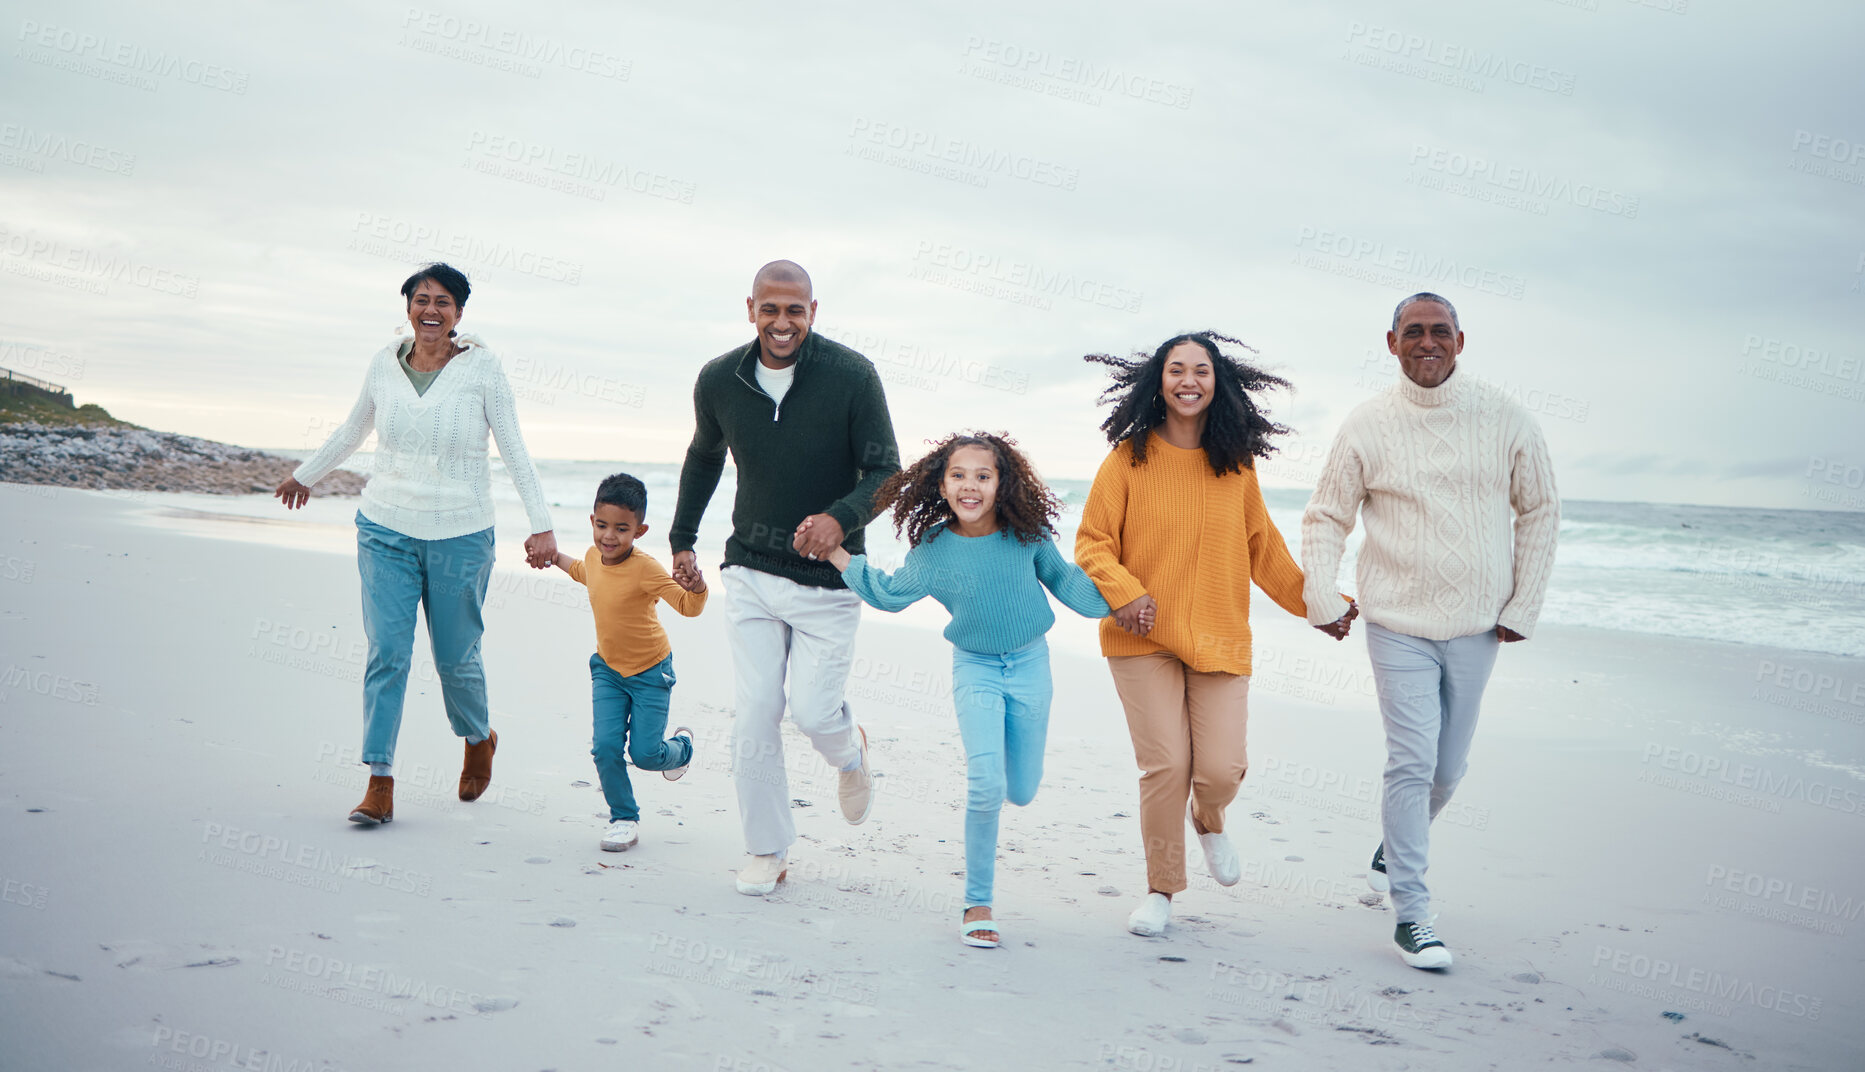 Buy stock photo Grandparents, parents and children running on beach enjoy holiday, travel vacation and weekend together. Relax, smile and happy family portrait holding hands for bonding, quality time and fun by sea